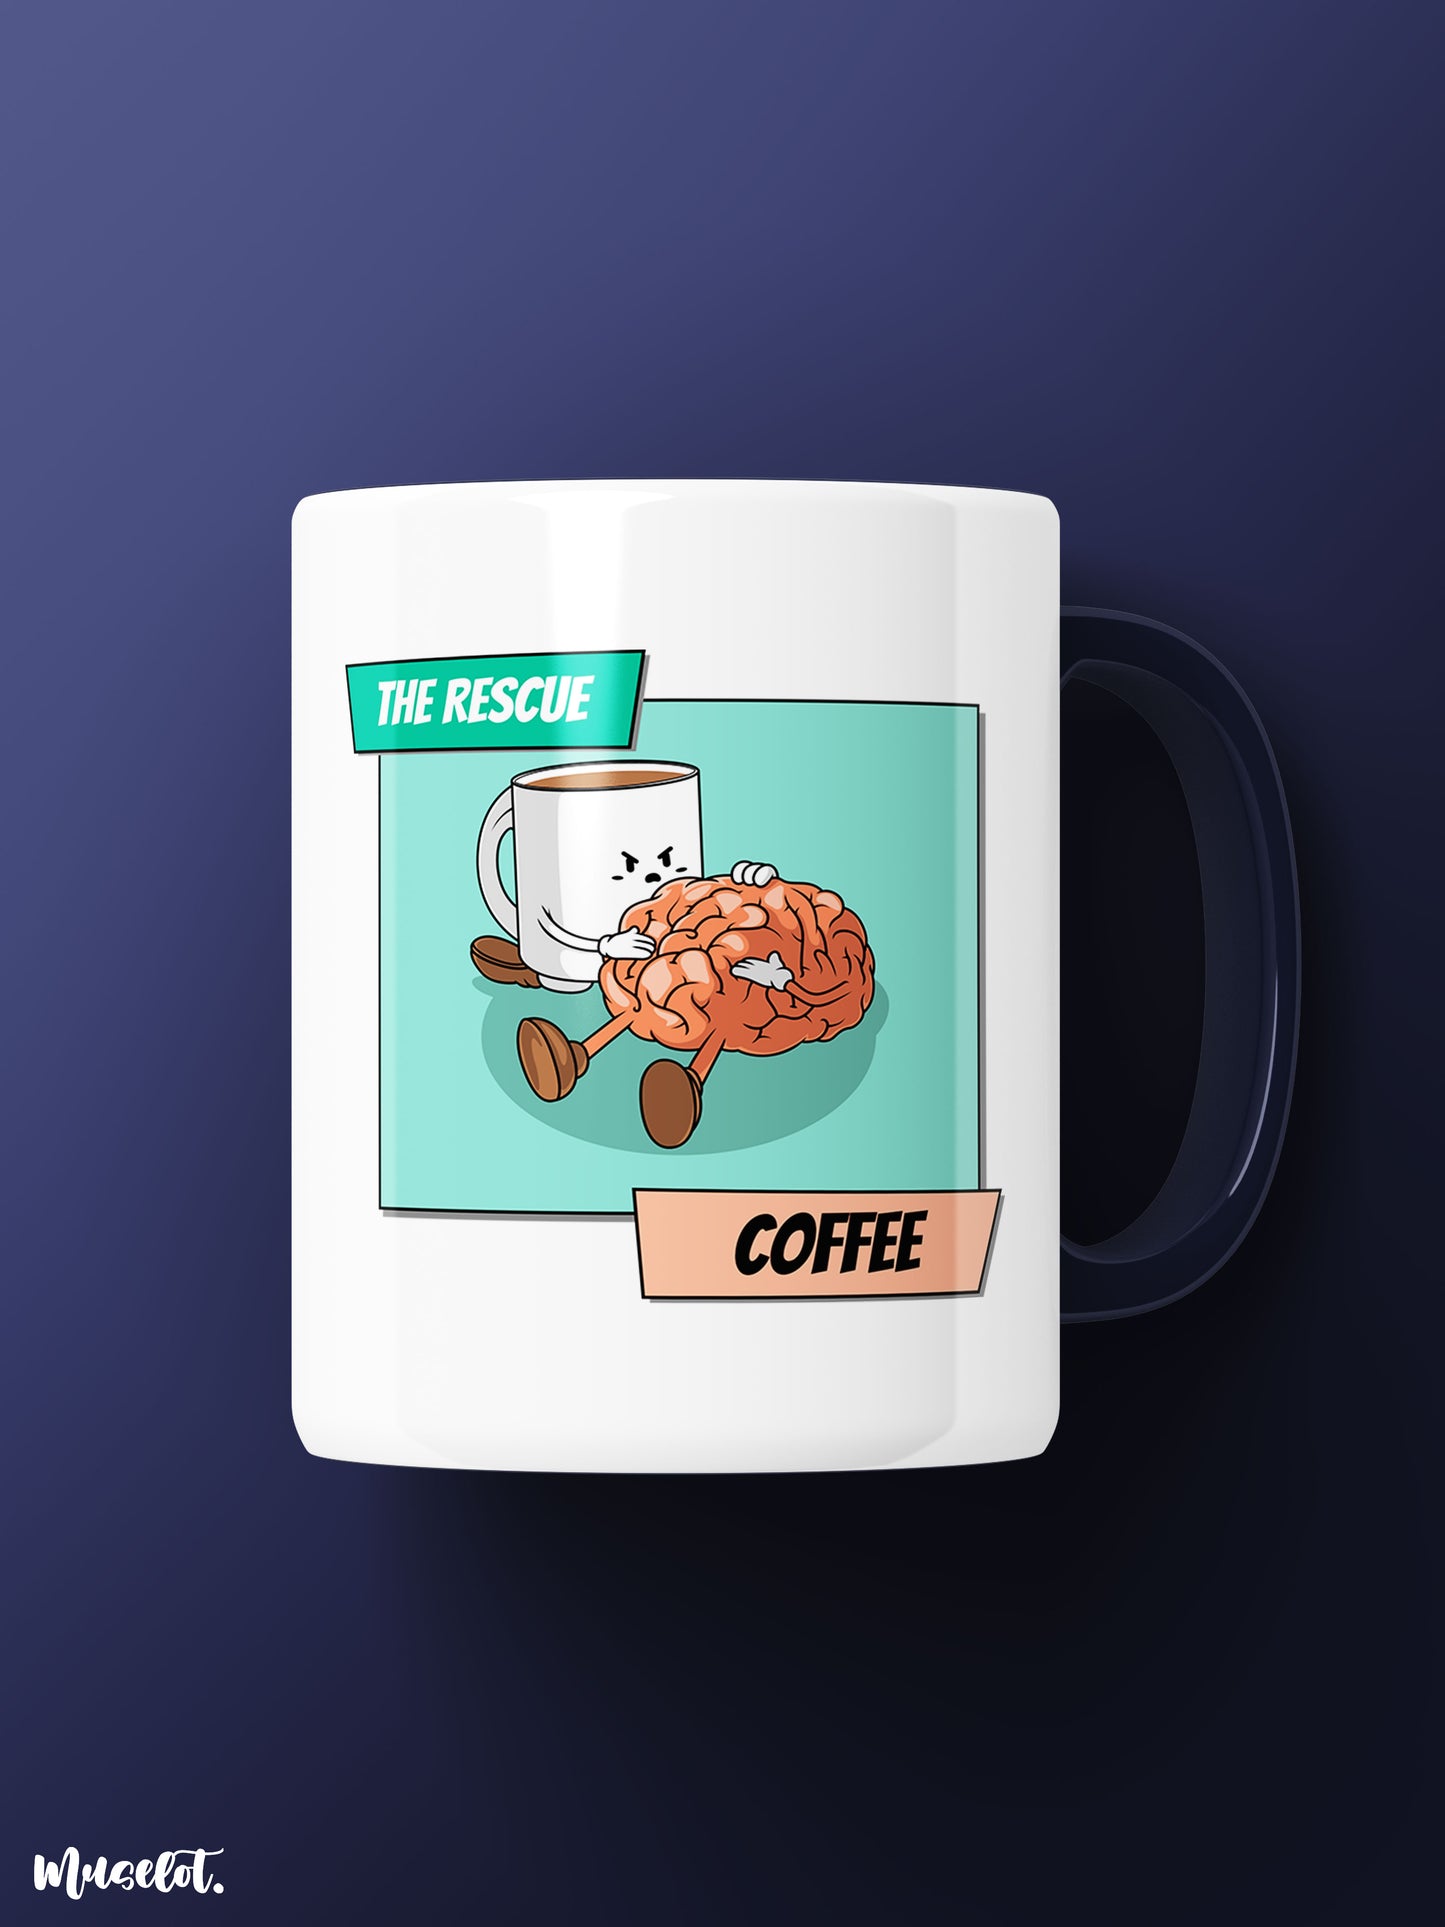 The rescuer - Coffee funny design illustrated printed white mugs at Muselot